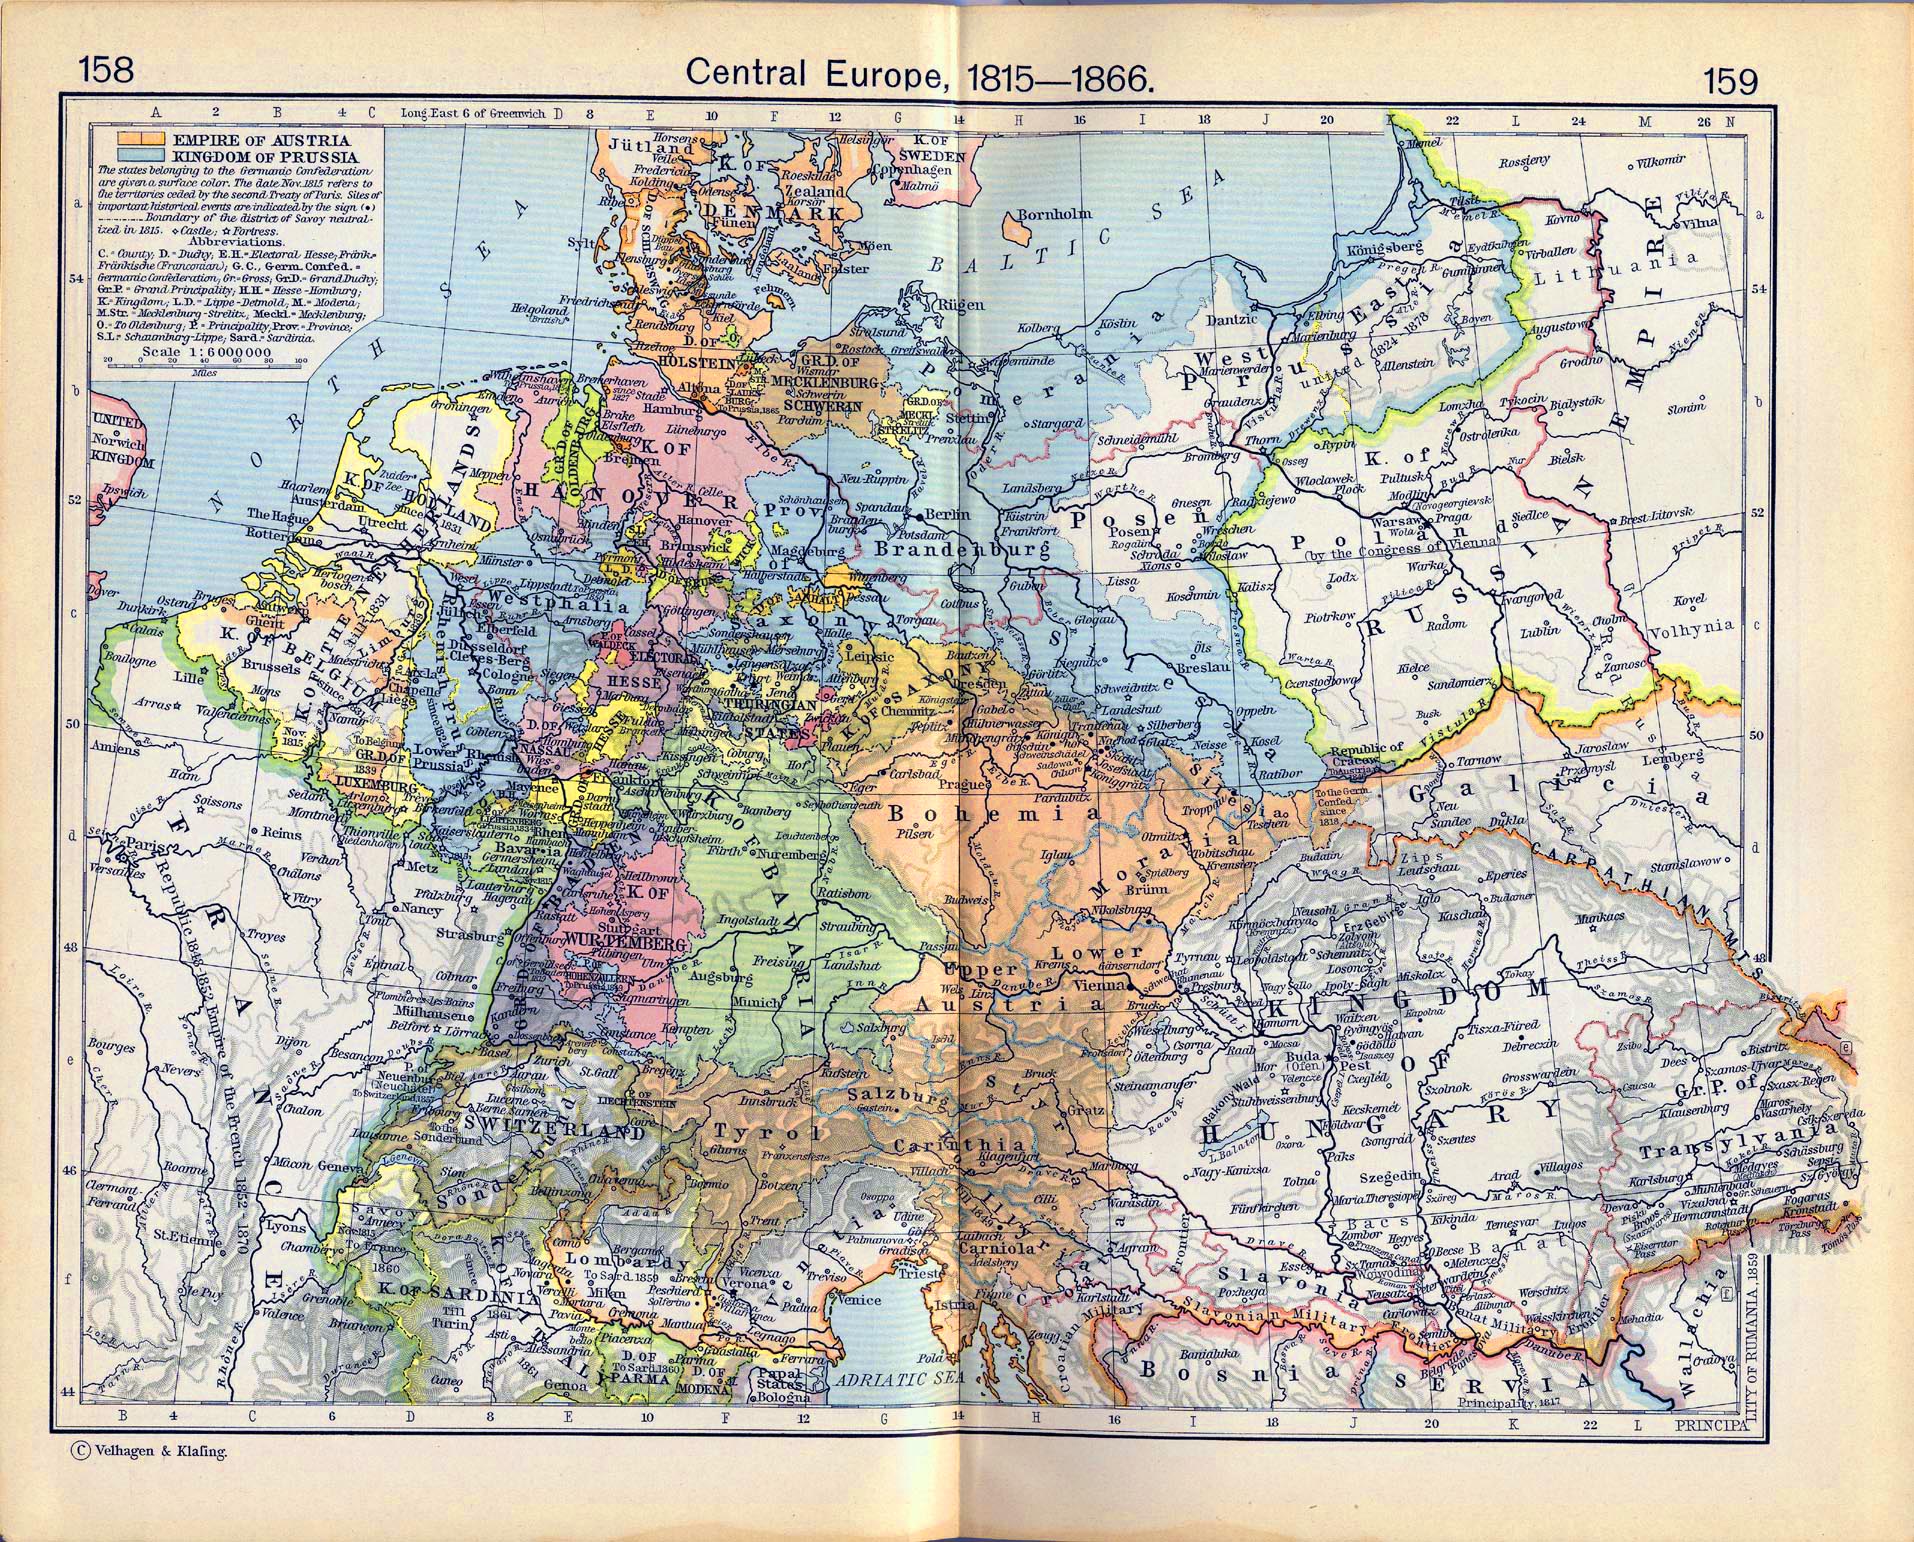 Map of Central Europe 1815-1866